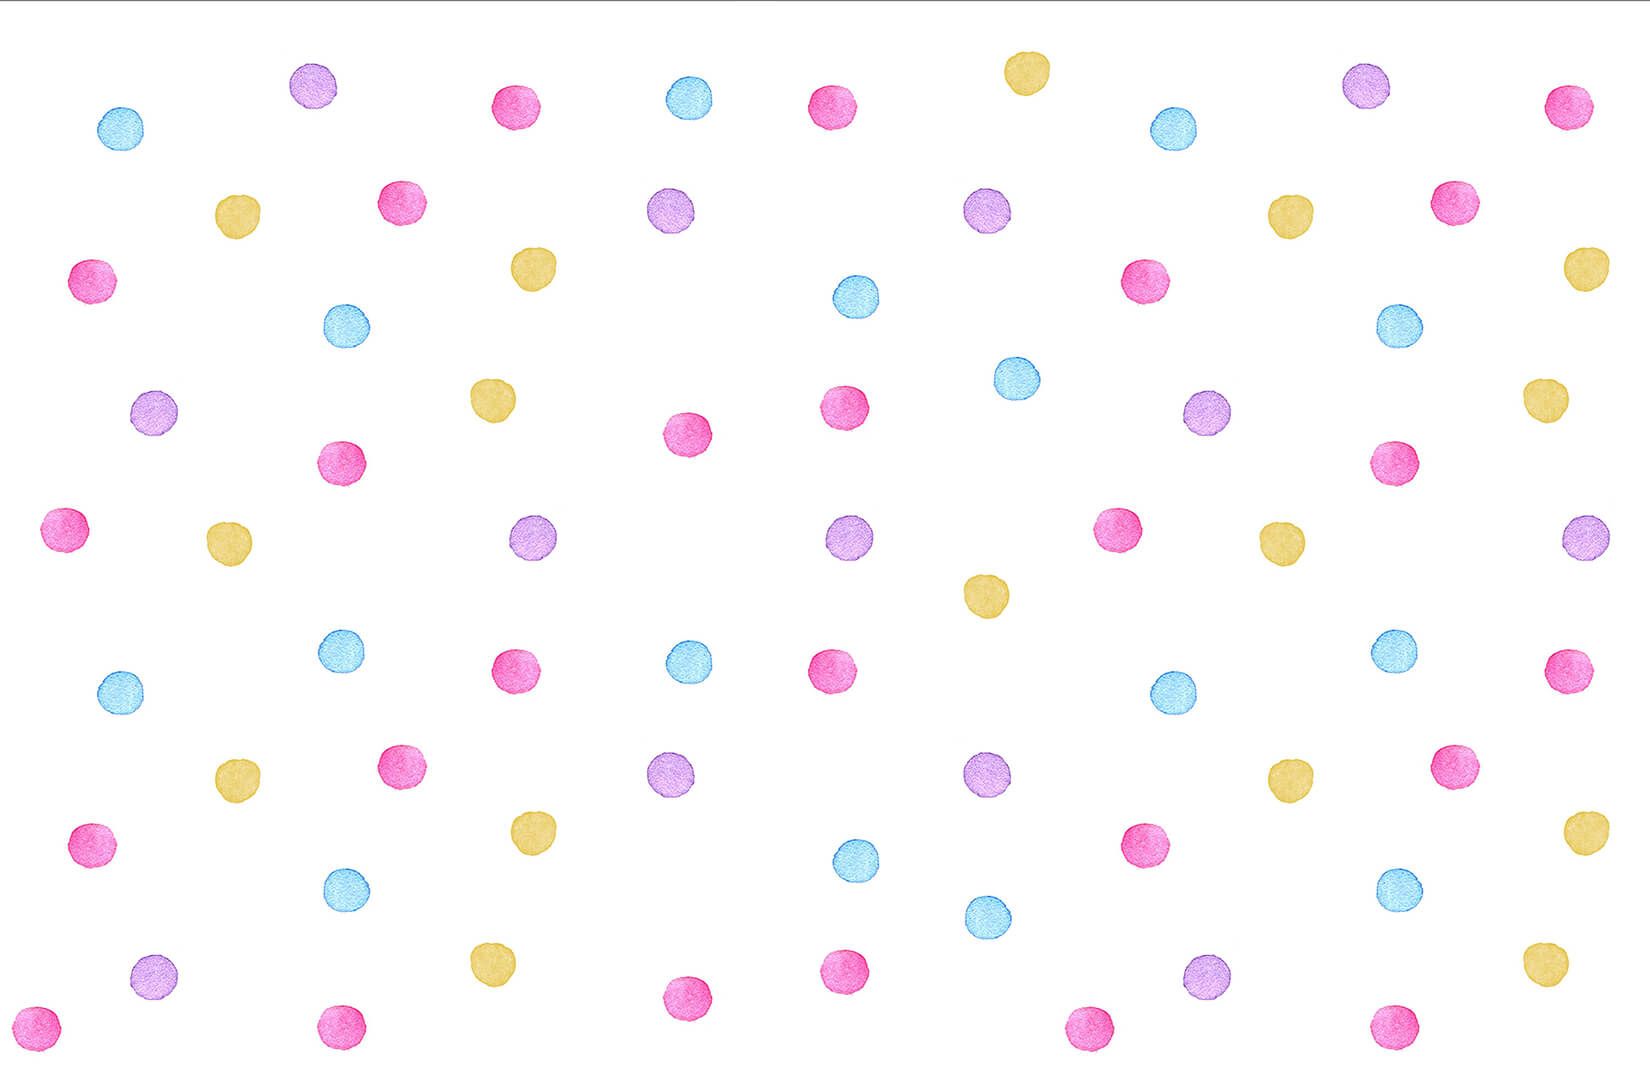 Pink And White Polka Dot Wallpapers